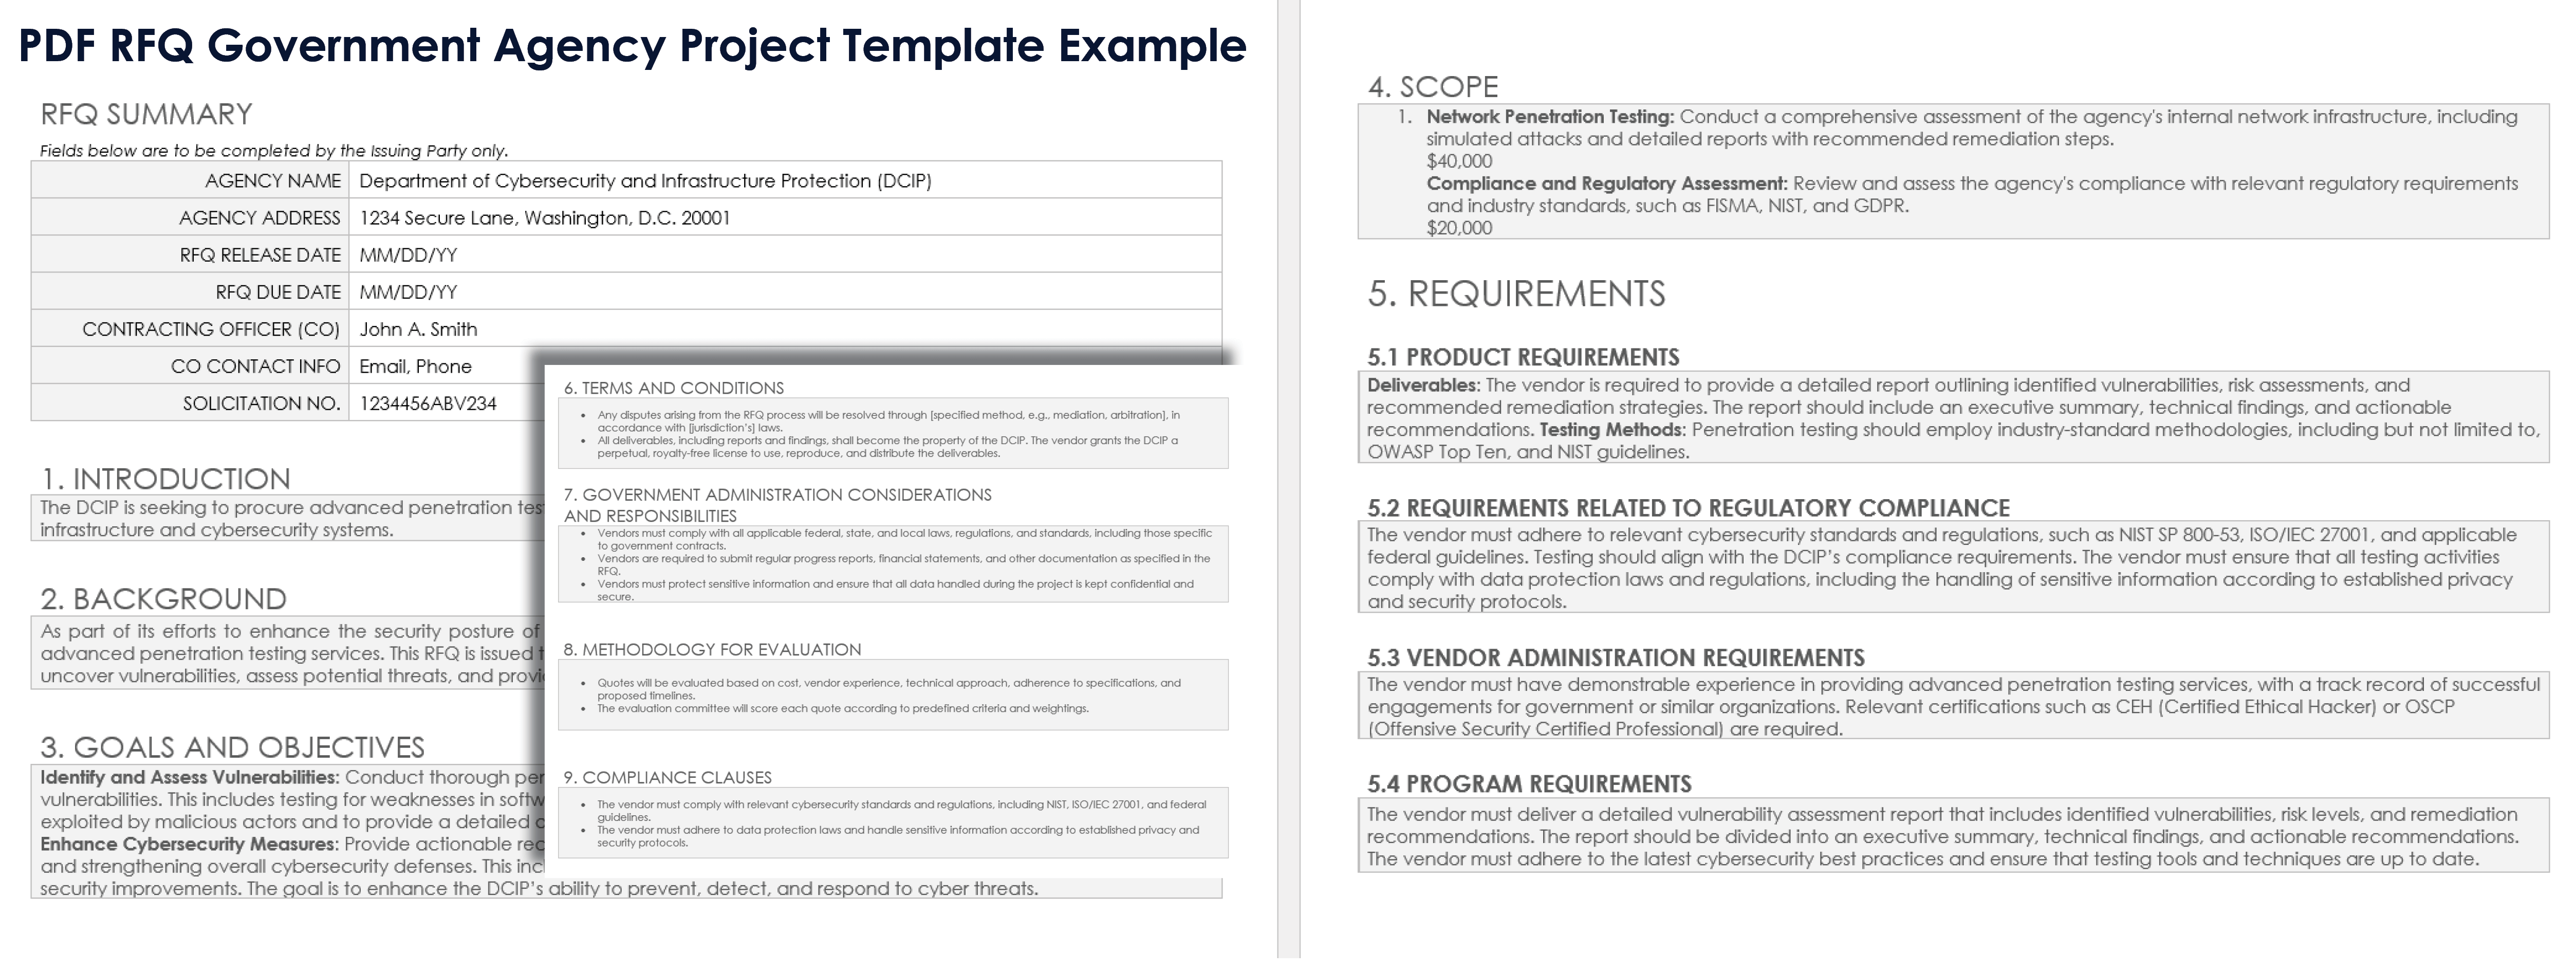 PDF Government Agency RFQ Template Example